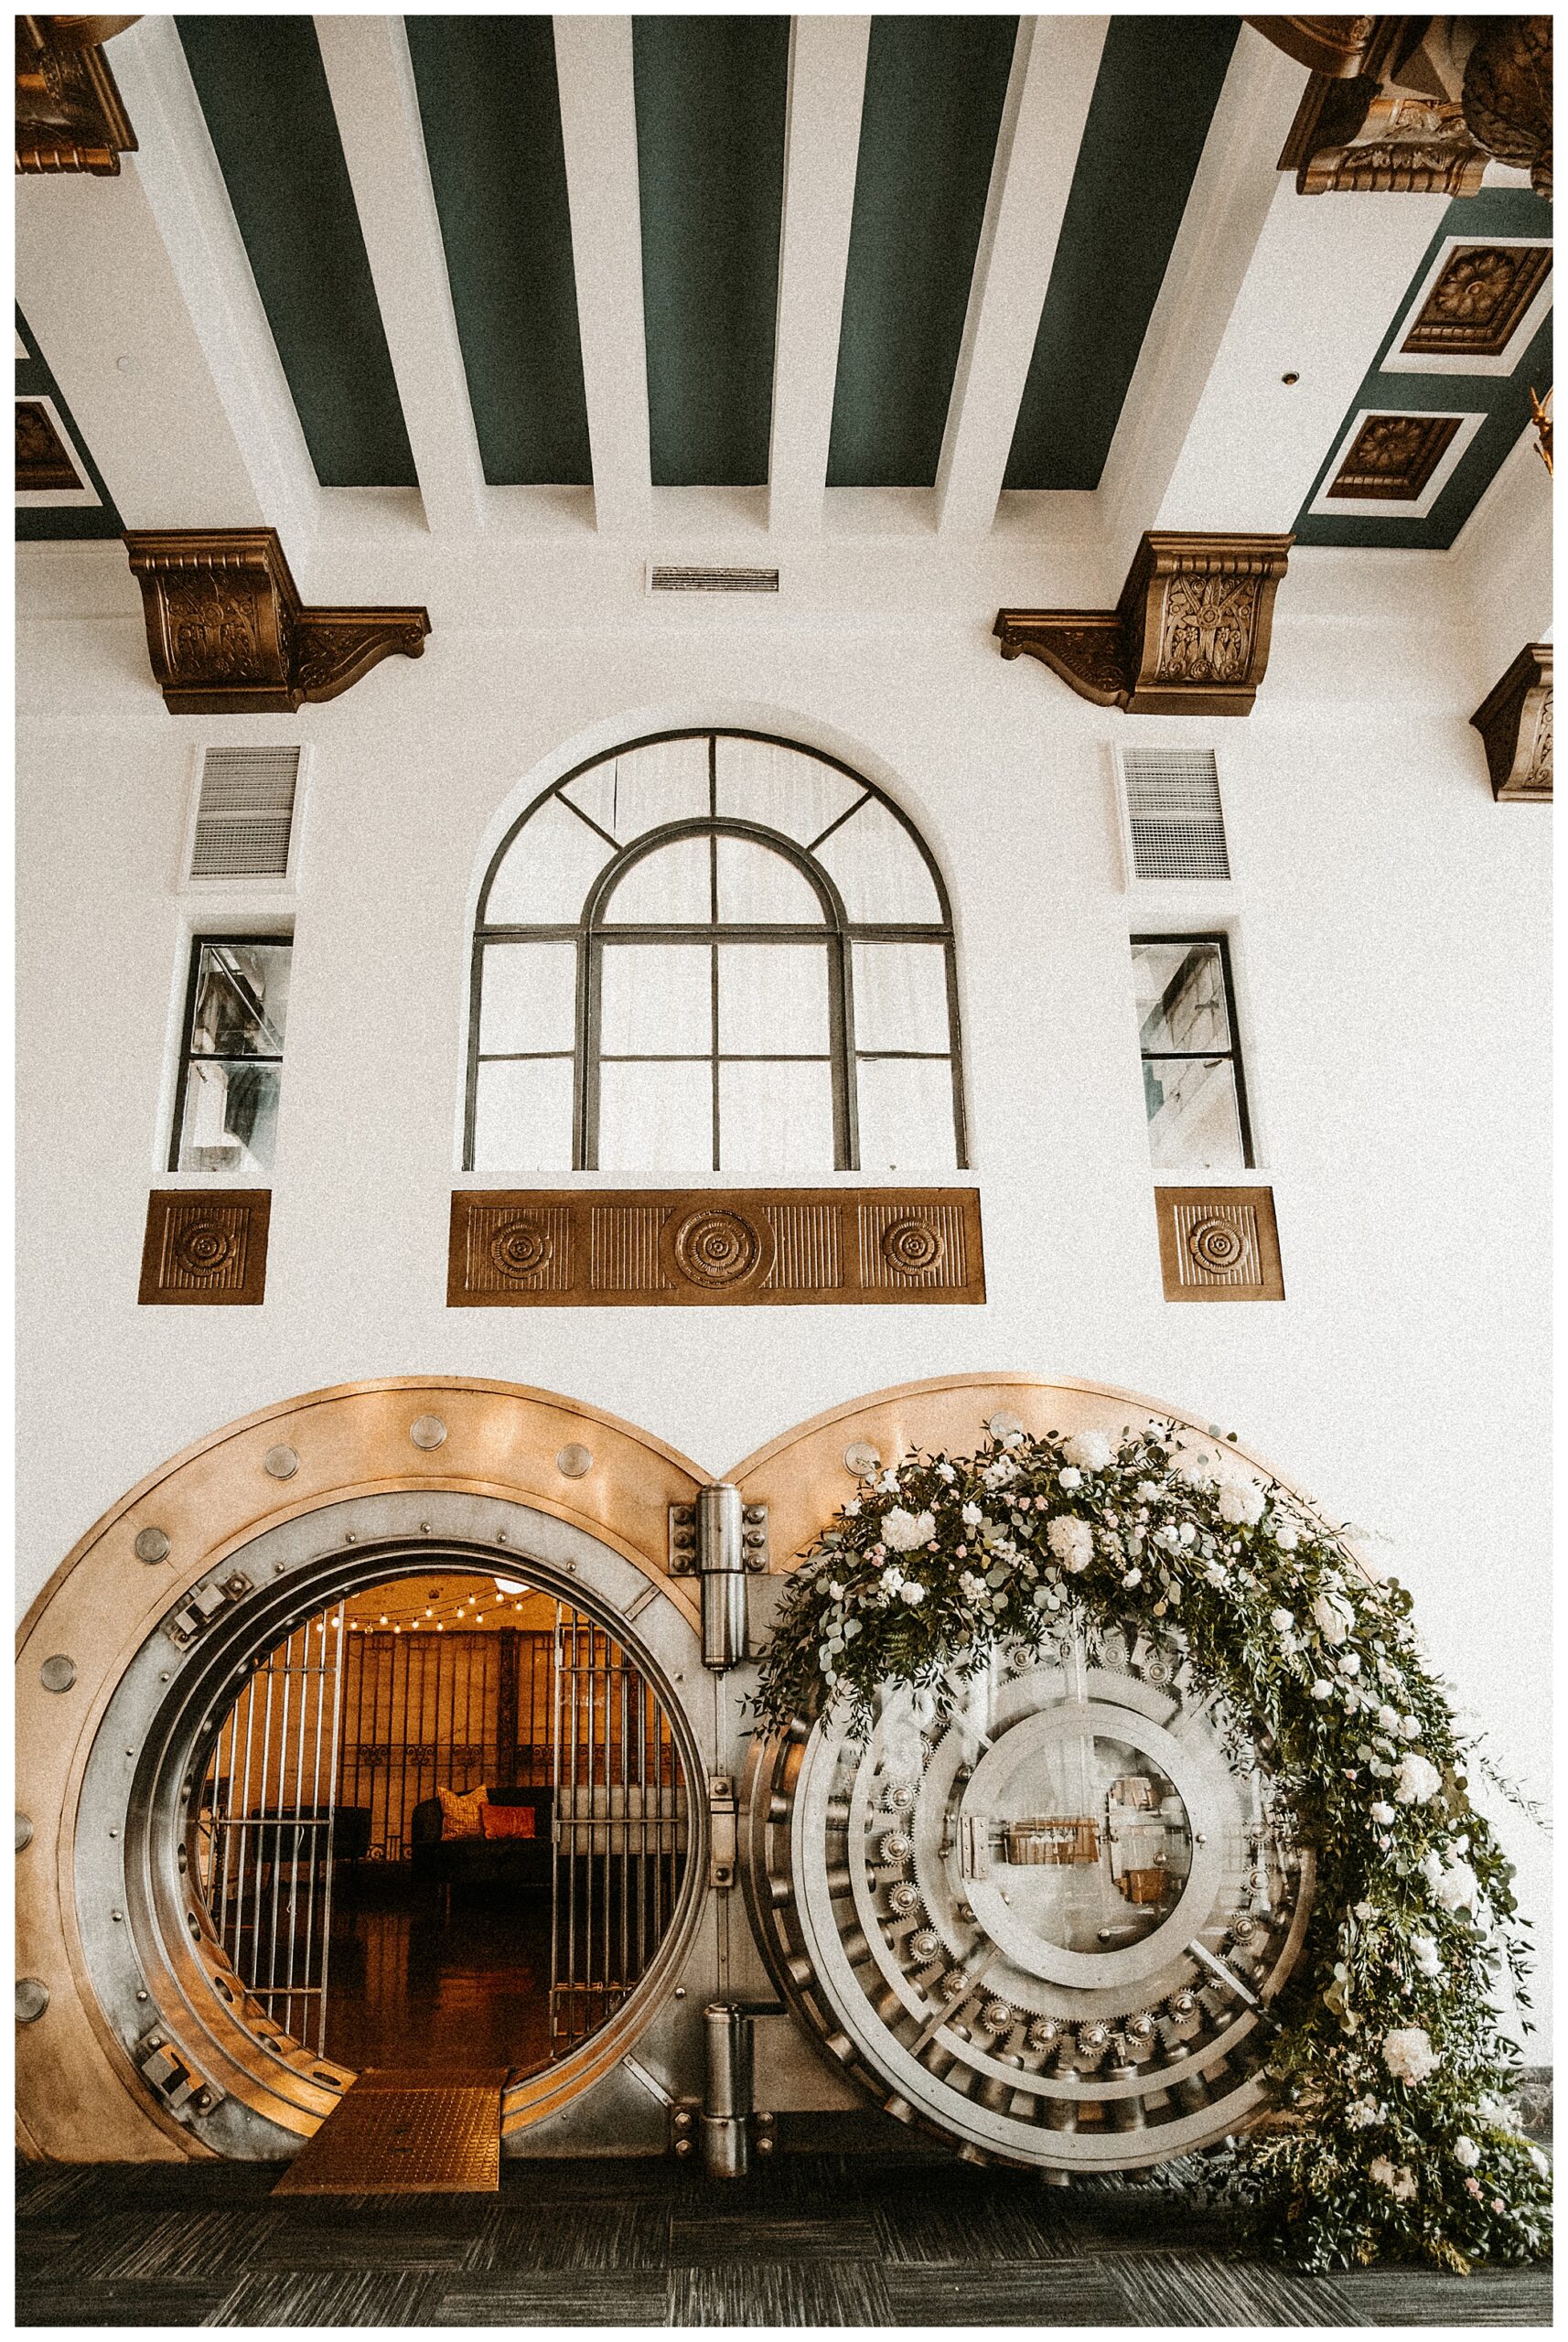 The Noble Missouri decorated vault with greenery and flowers STL wedding photographer